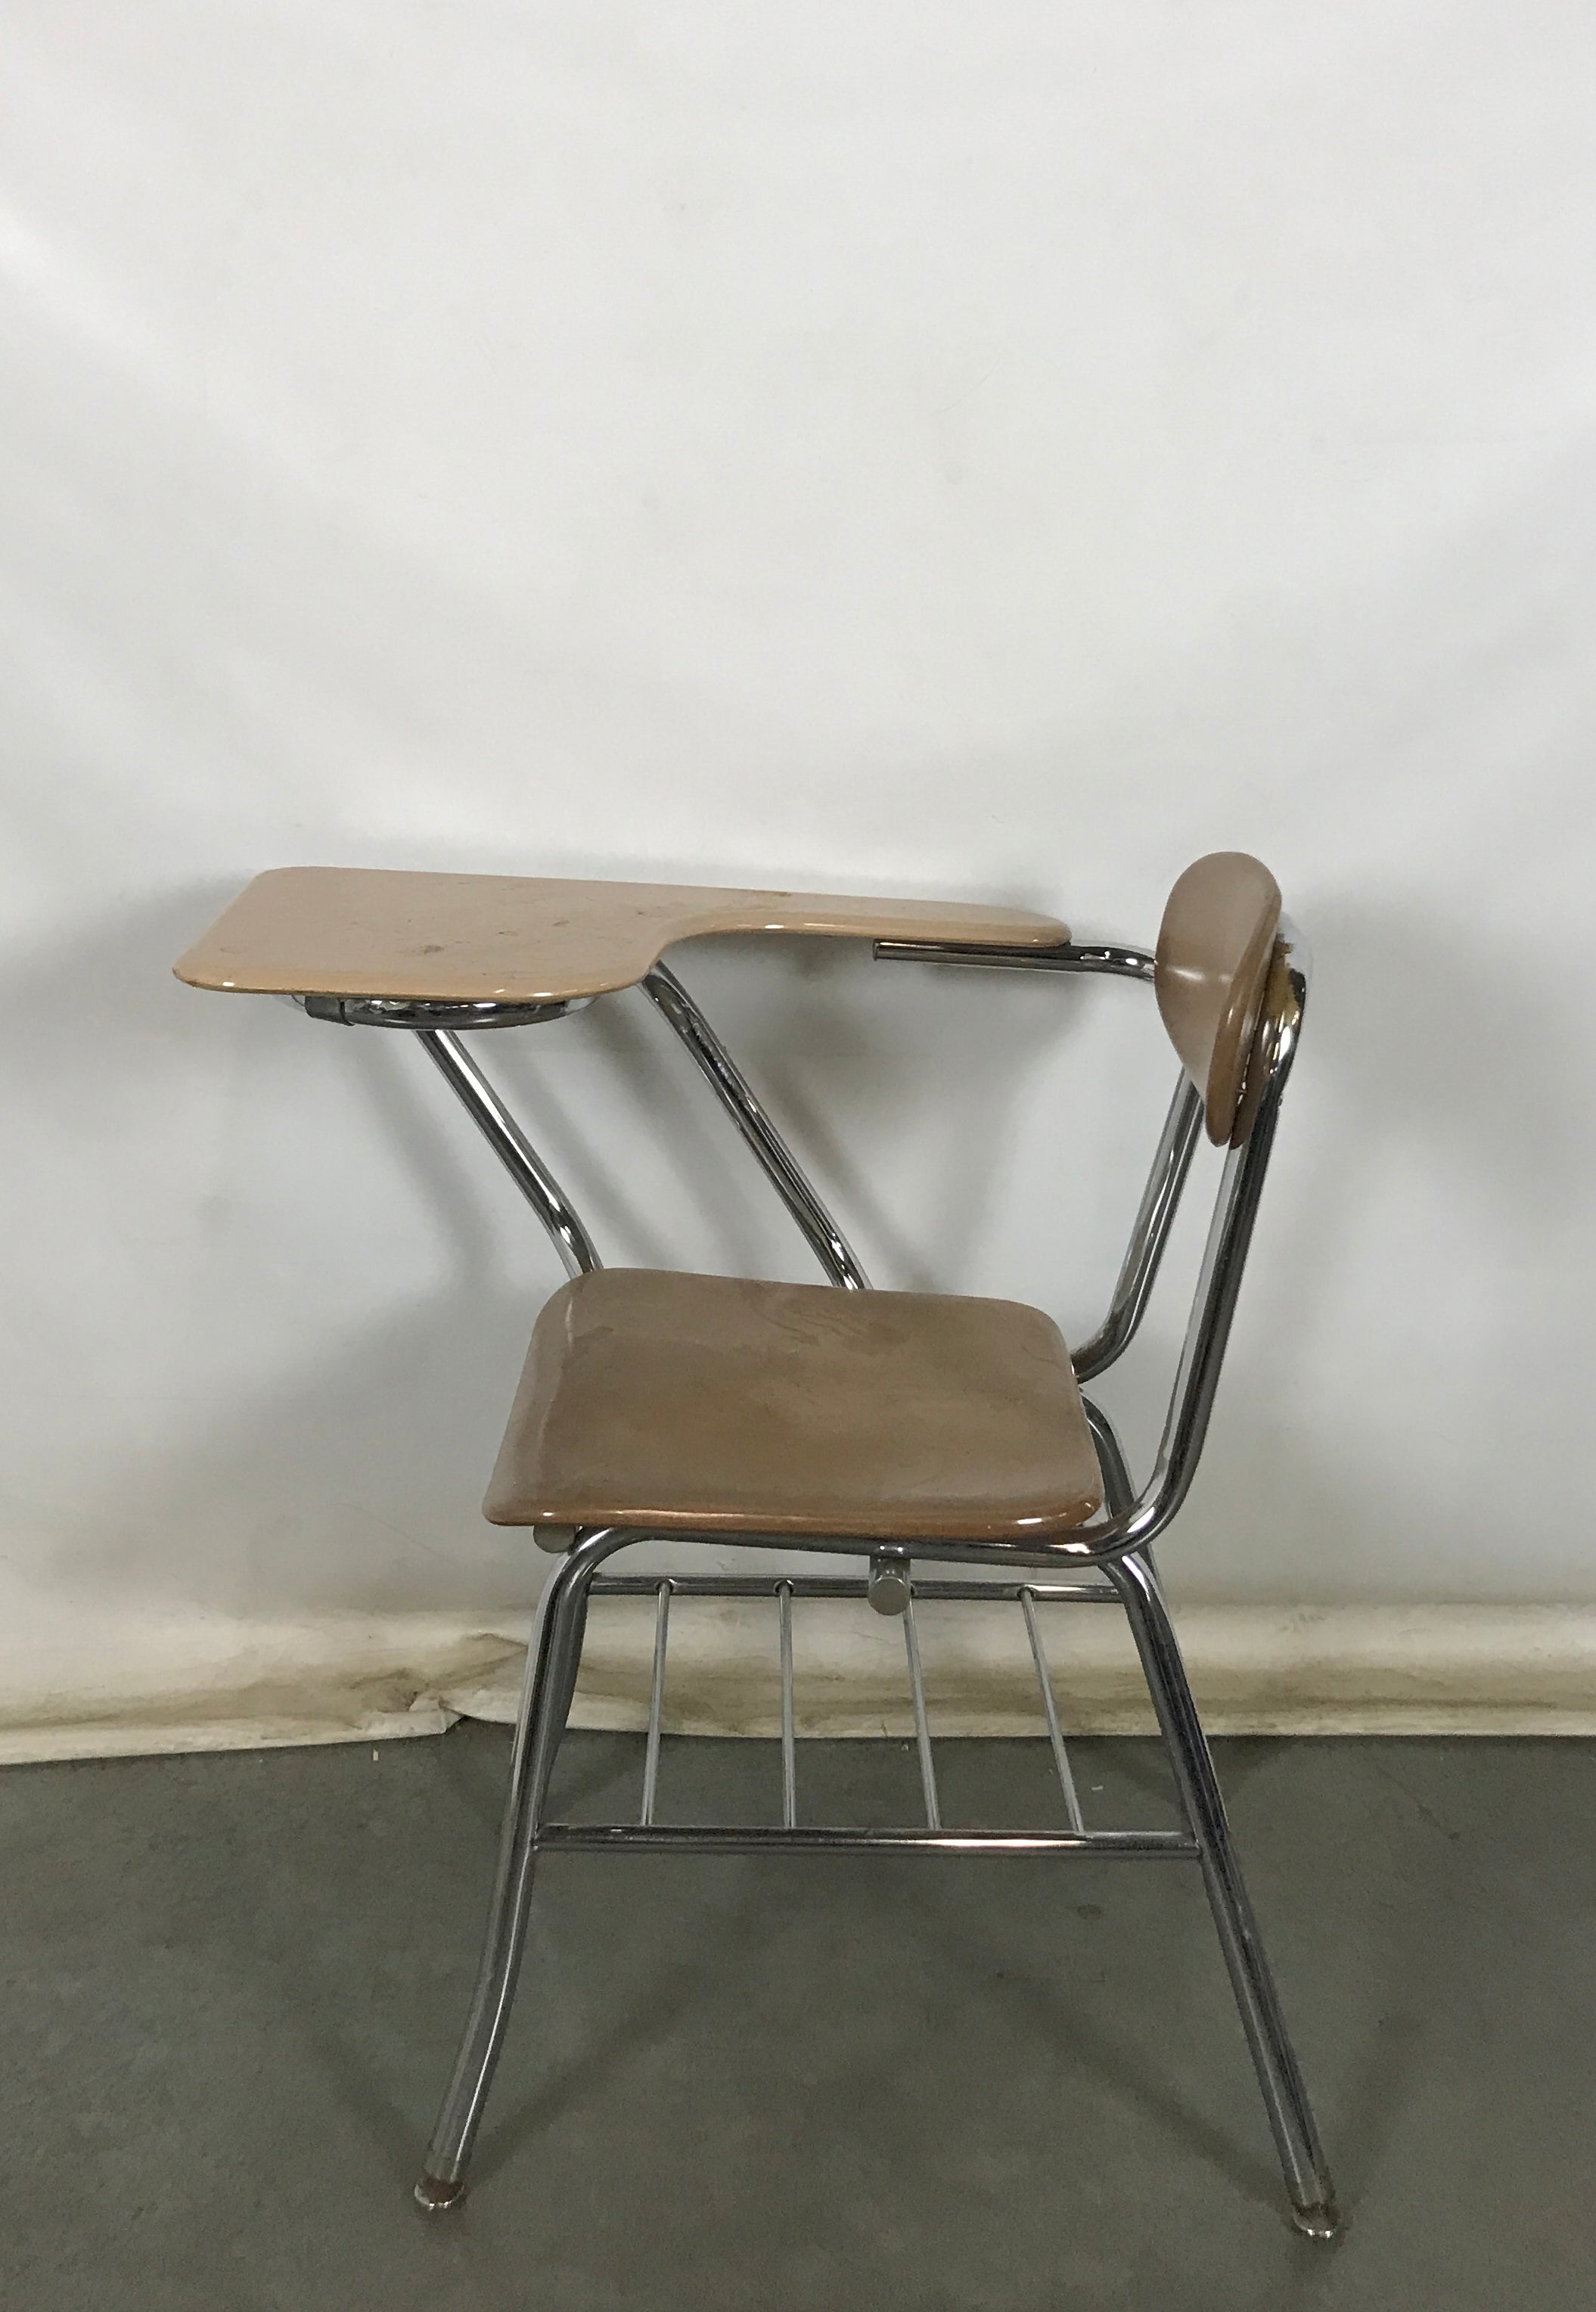 Right-Sided Tan Student Desk